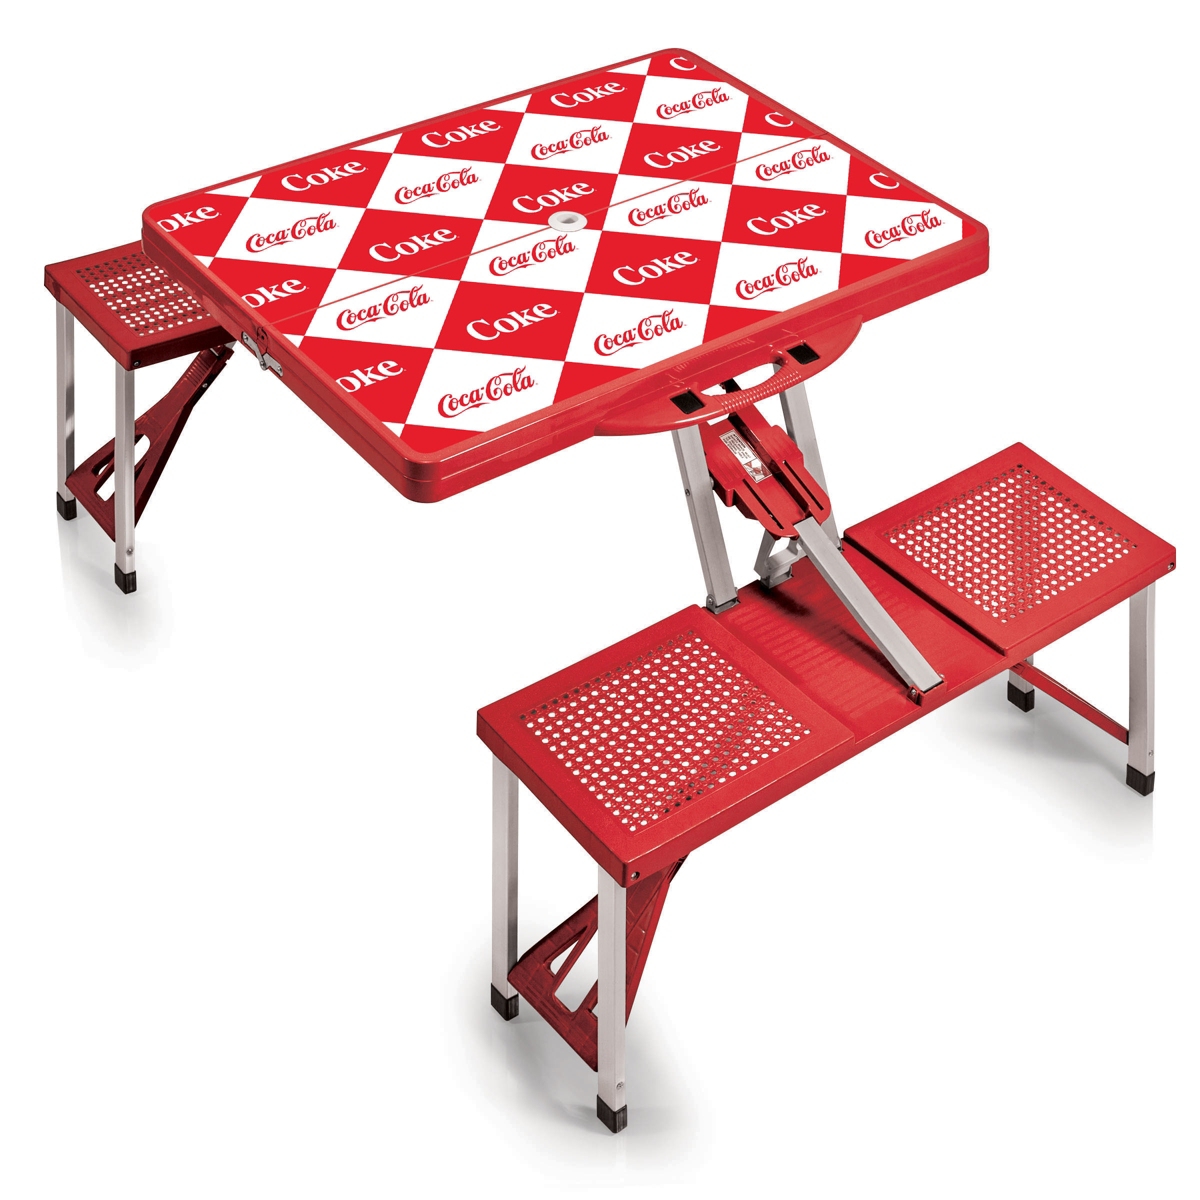 by Picnic Time Coca-Cola Checkered Picnic Table Portable Folding Table with Seats - Red